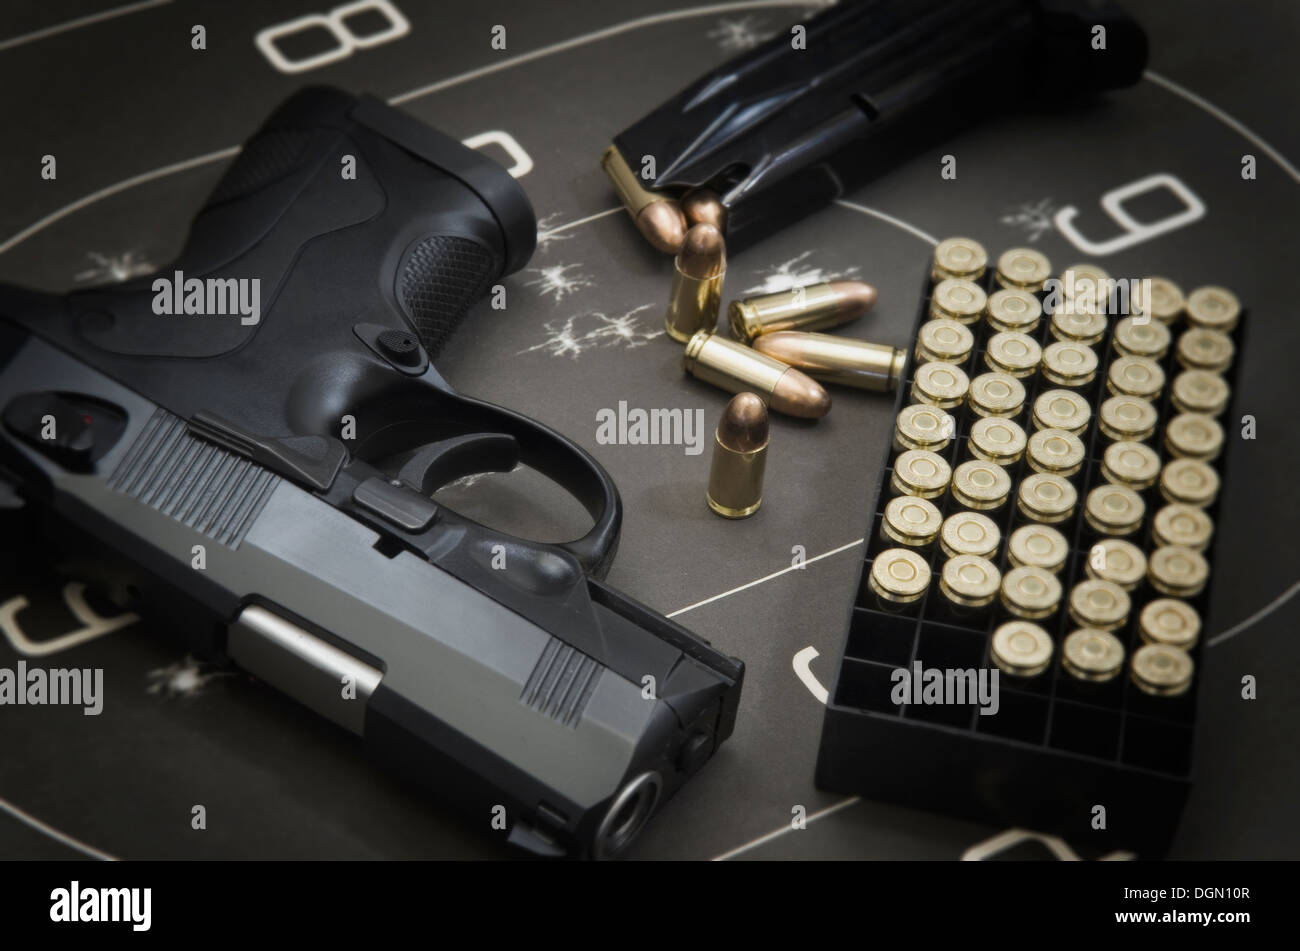 Beretta 9mm PX4 Storm semi-automatic pistol with magazine and full metal jacket ammunition on background of shooting target Stock Photo